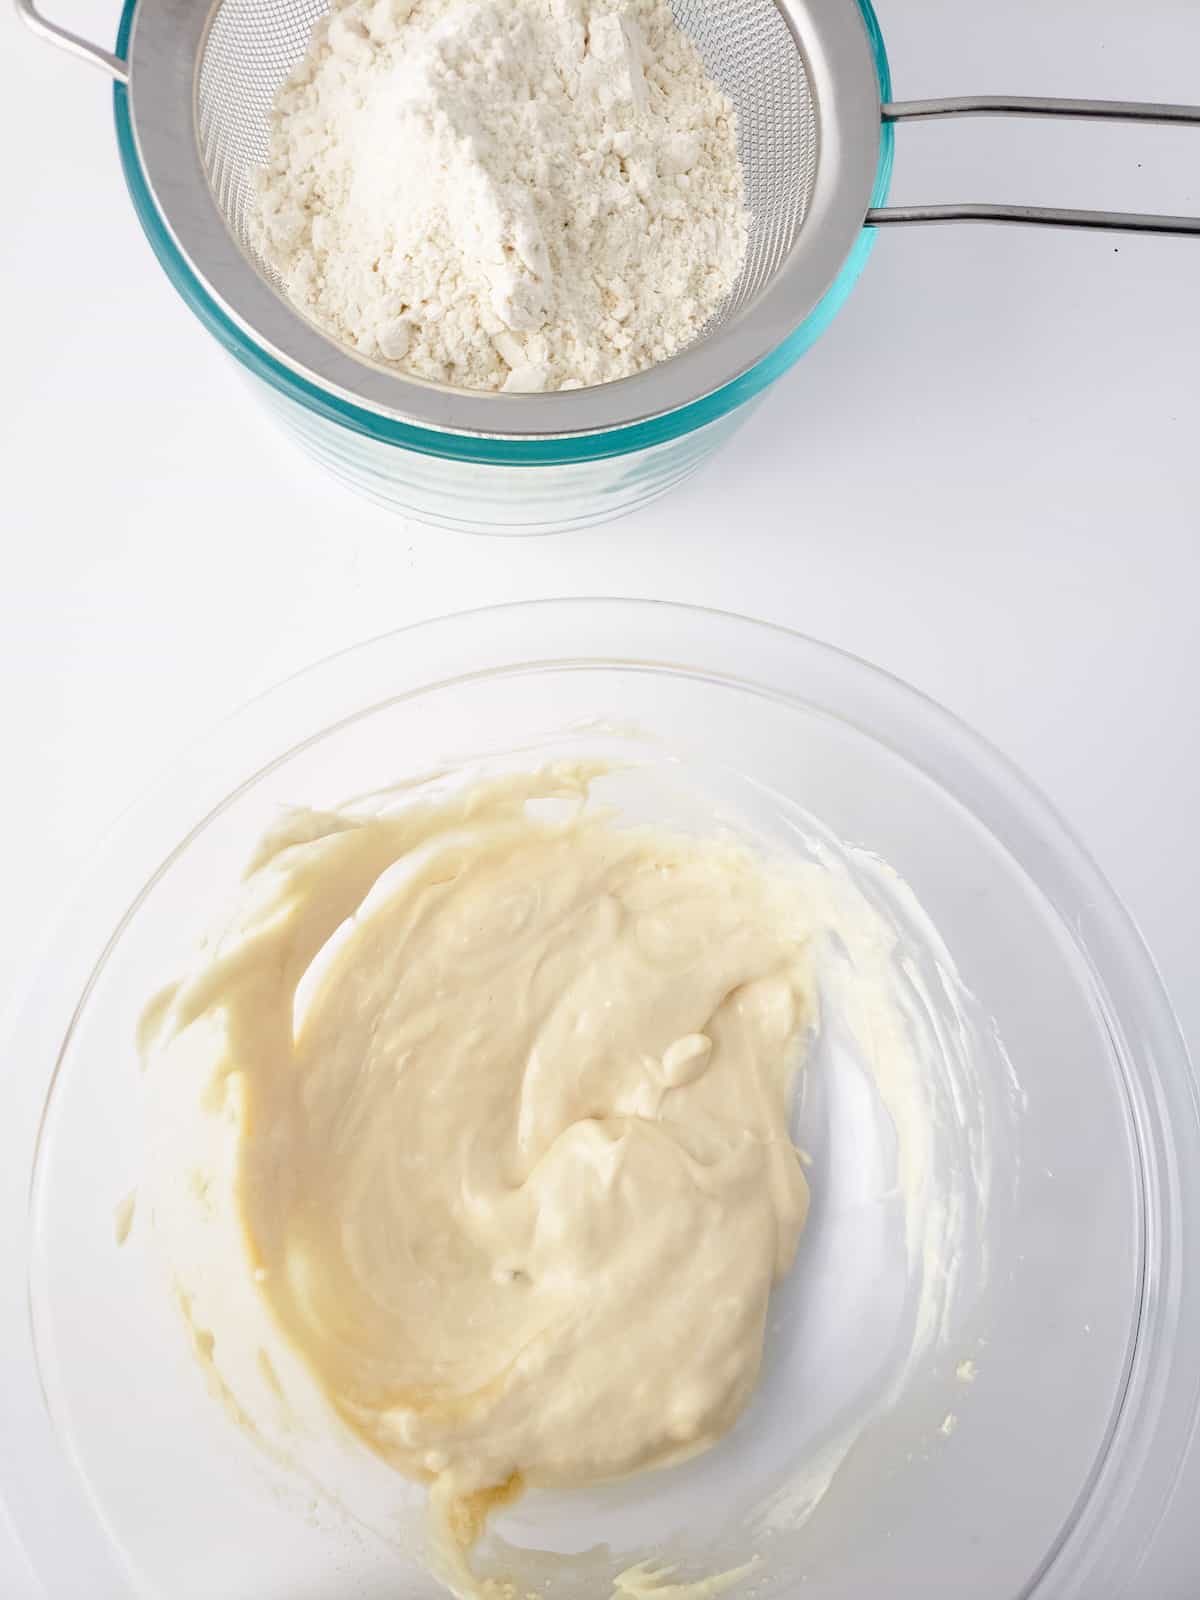 Cream cheese with vanilla and syrup in a bowl with bowl of flour.